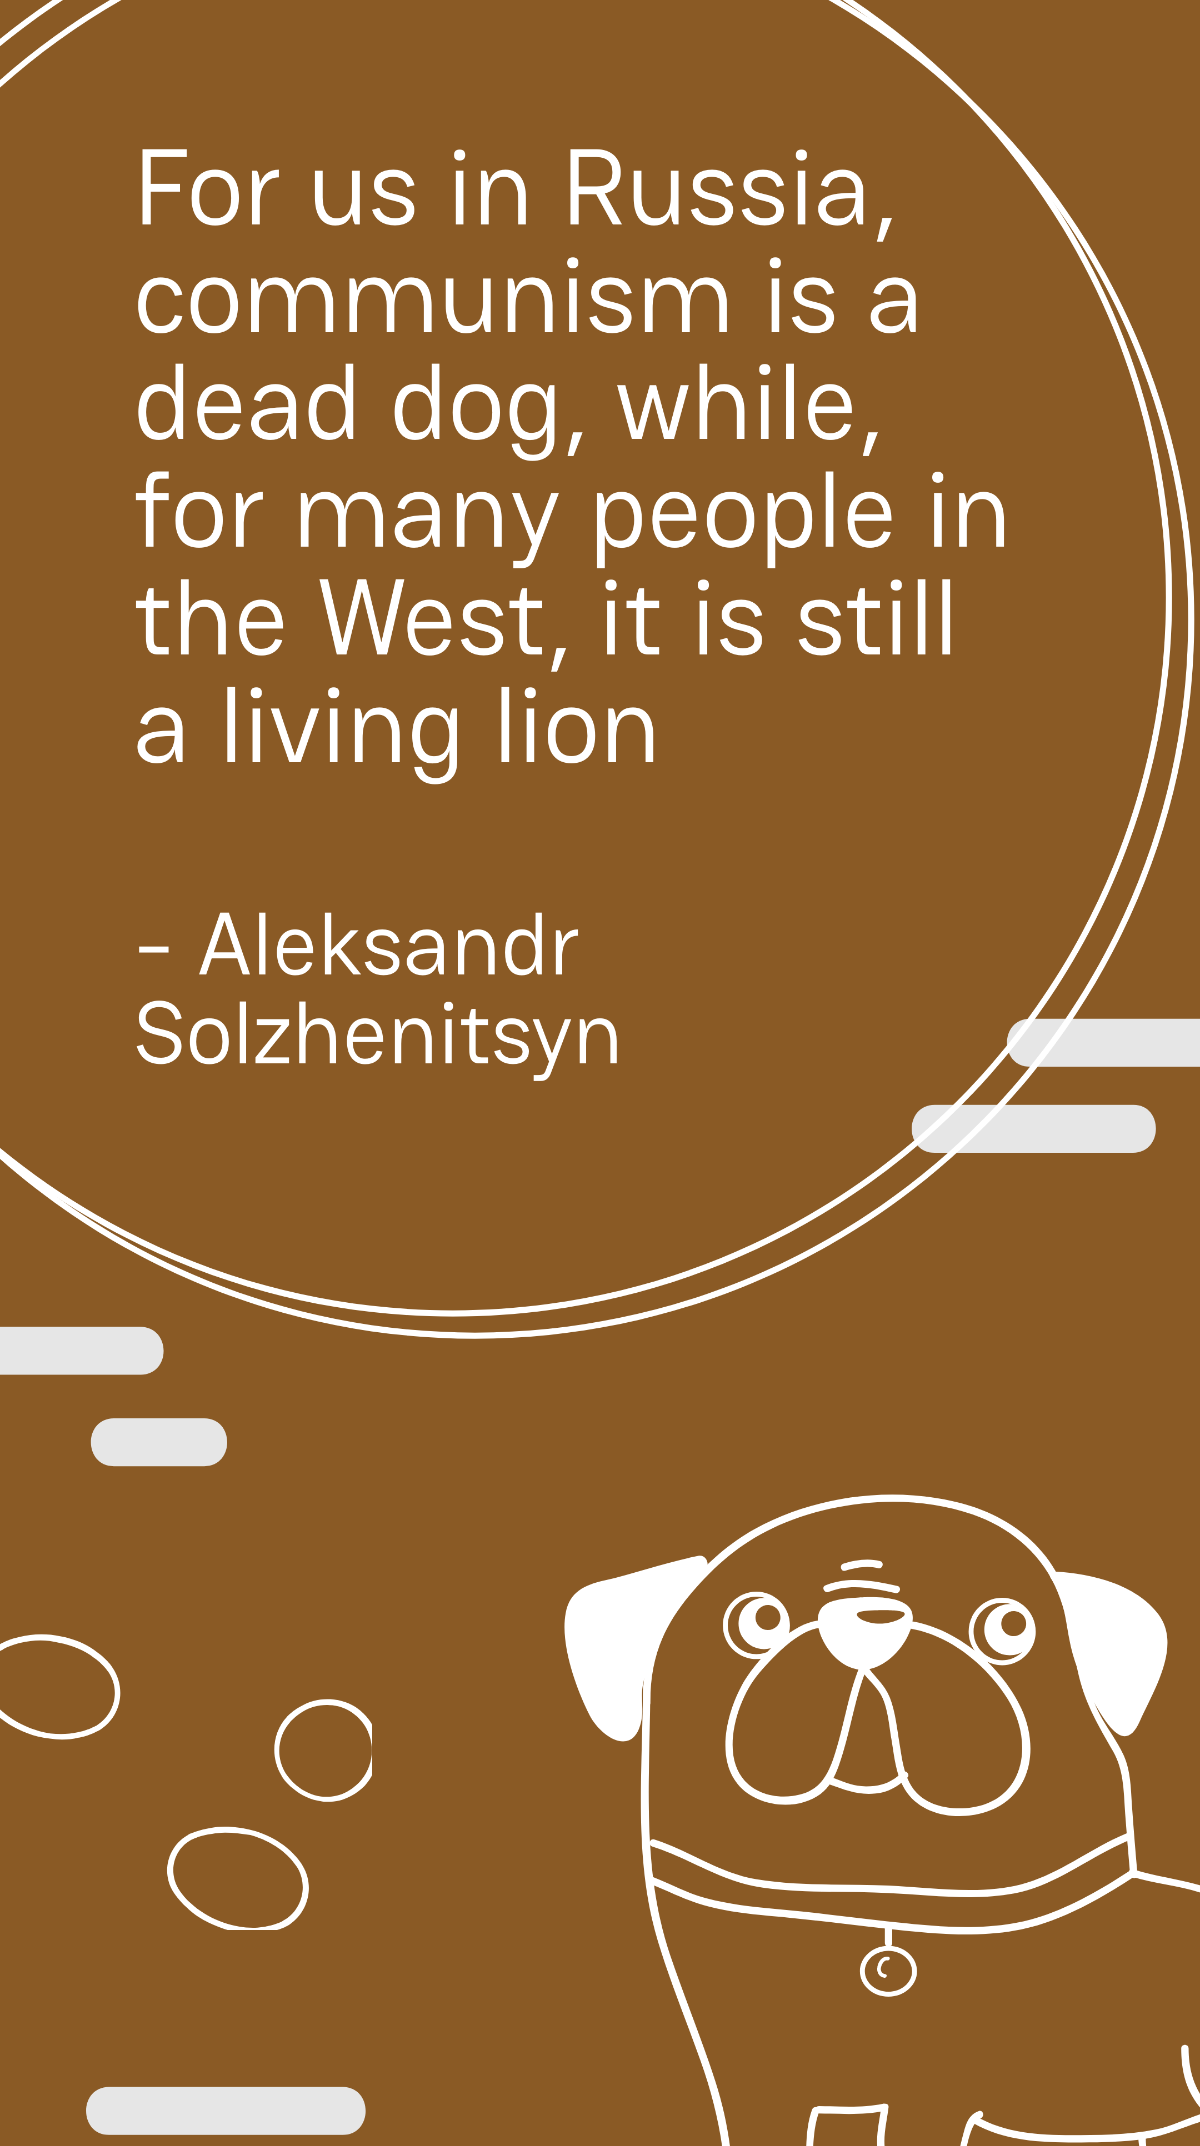 Free Aleksandr Solzhenitsyn - For us in Russia, communism is a dead dog, while, for many people in the West, it is still a living lion Template